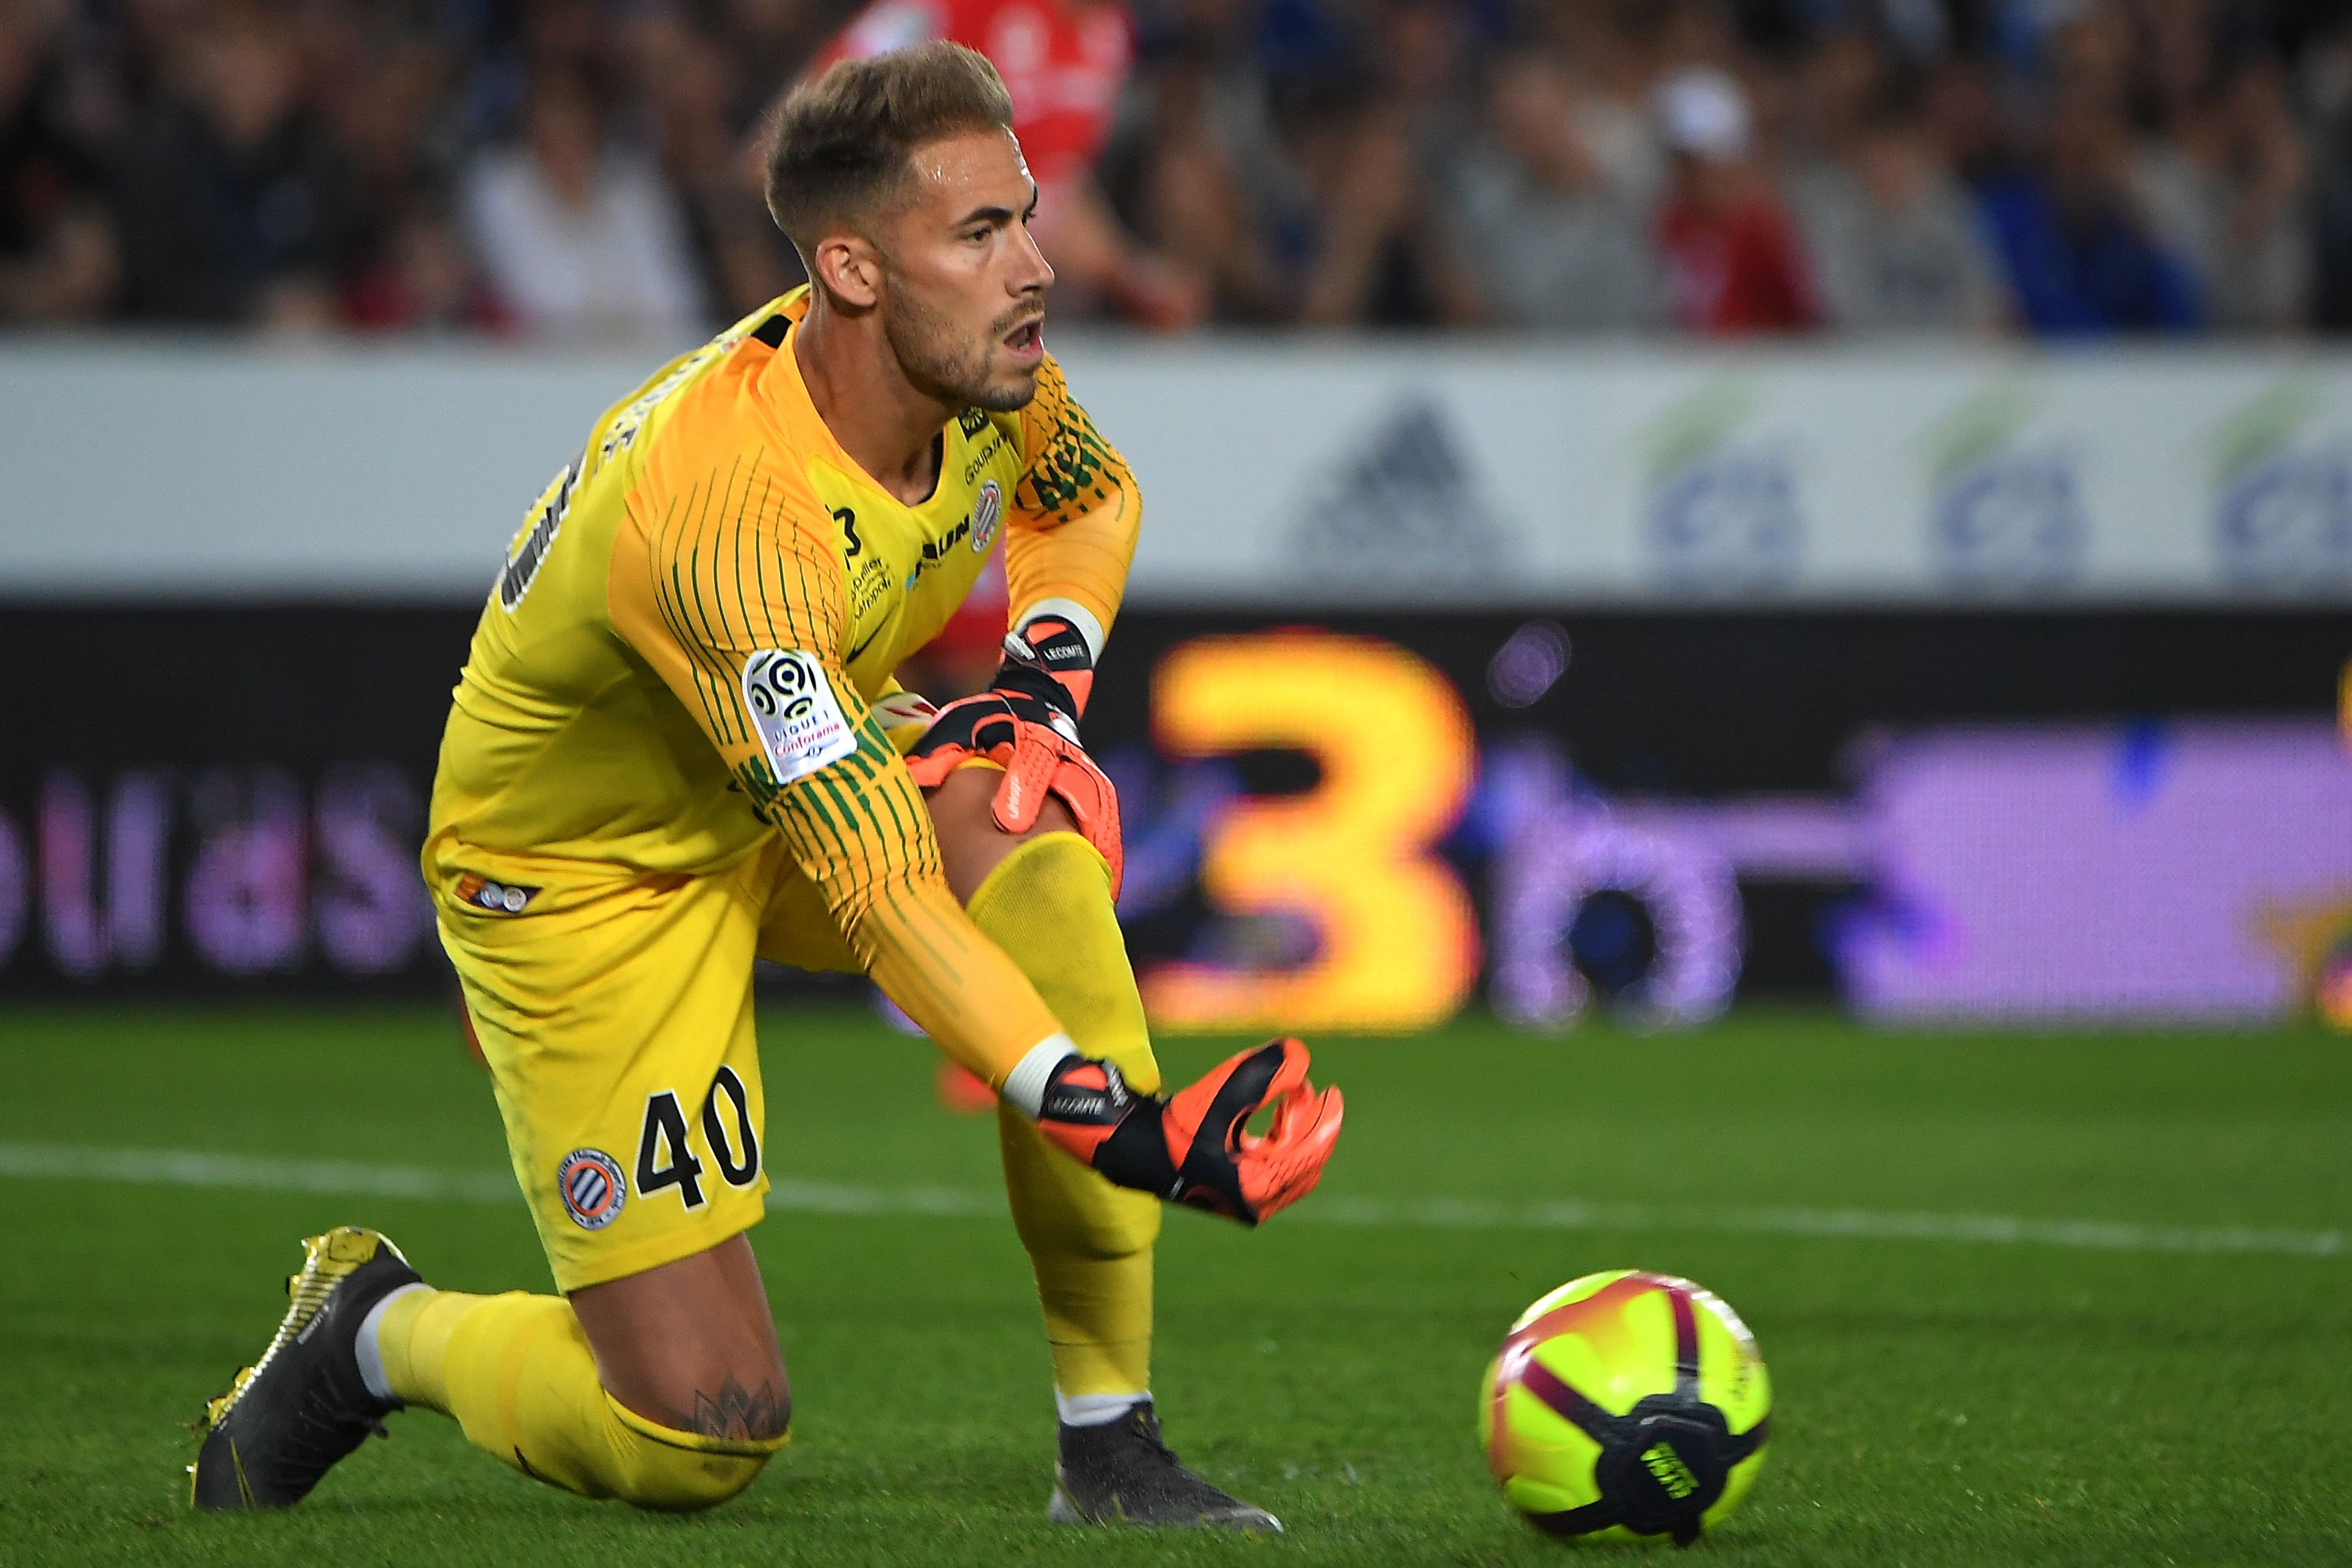 Montpellier's French goalkeeper Benjamin Lecomte controls the ball during the French L1 football match between Strasbourg and Montpellier, on April 20, 2019 at the Meinau stadium in Strasbourg, eastern France. (Photo by PATRICK HERTZOG / AFP)        (Photo credit should read PATRICK HERTZOG/AFP/Getty Images)